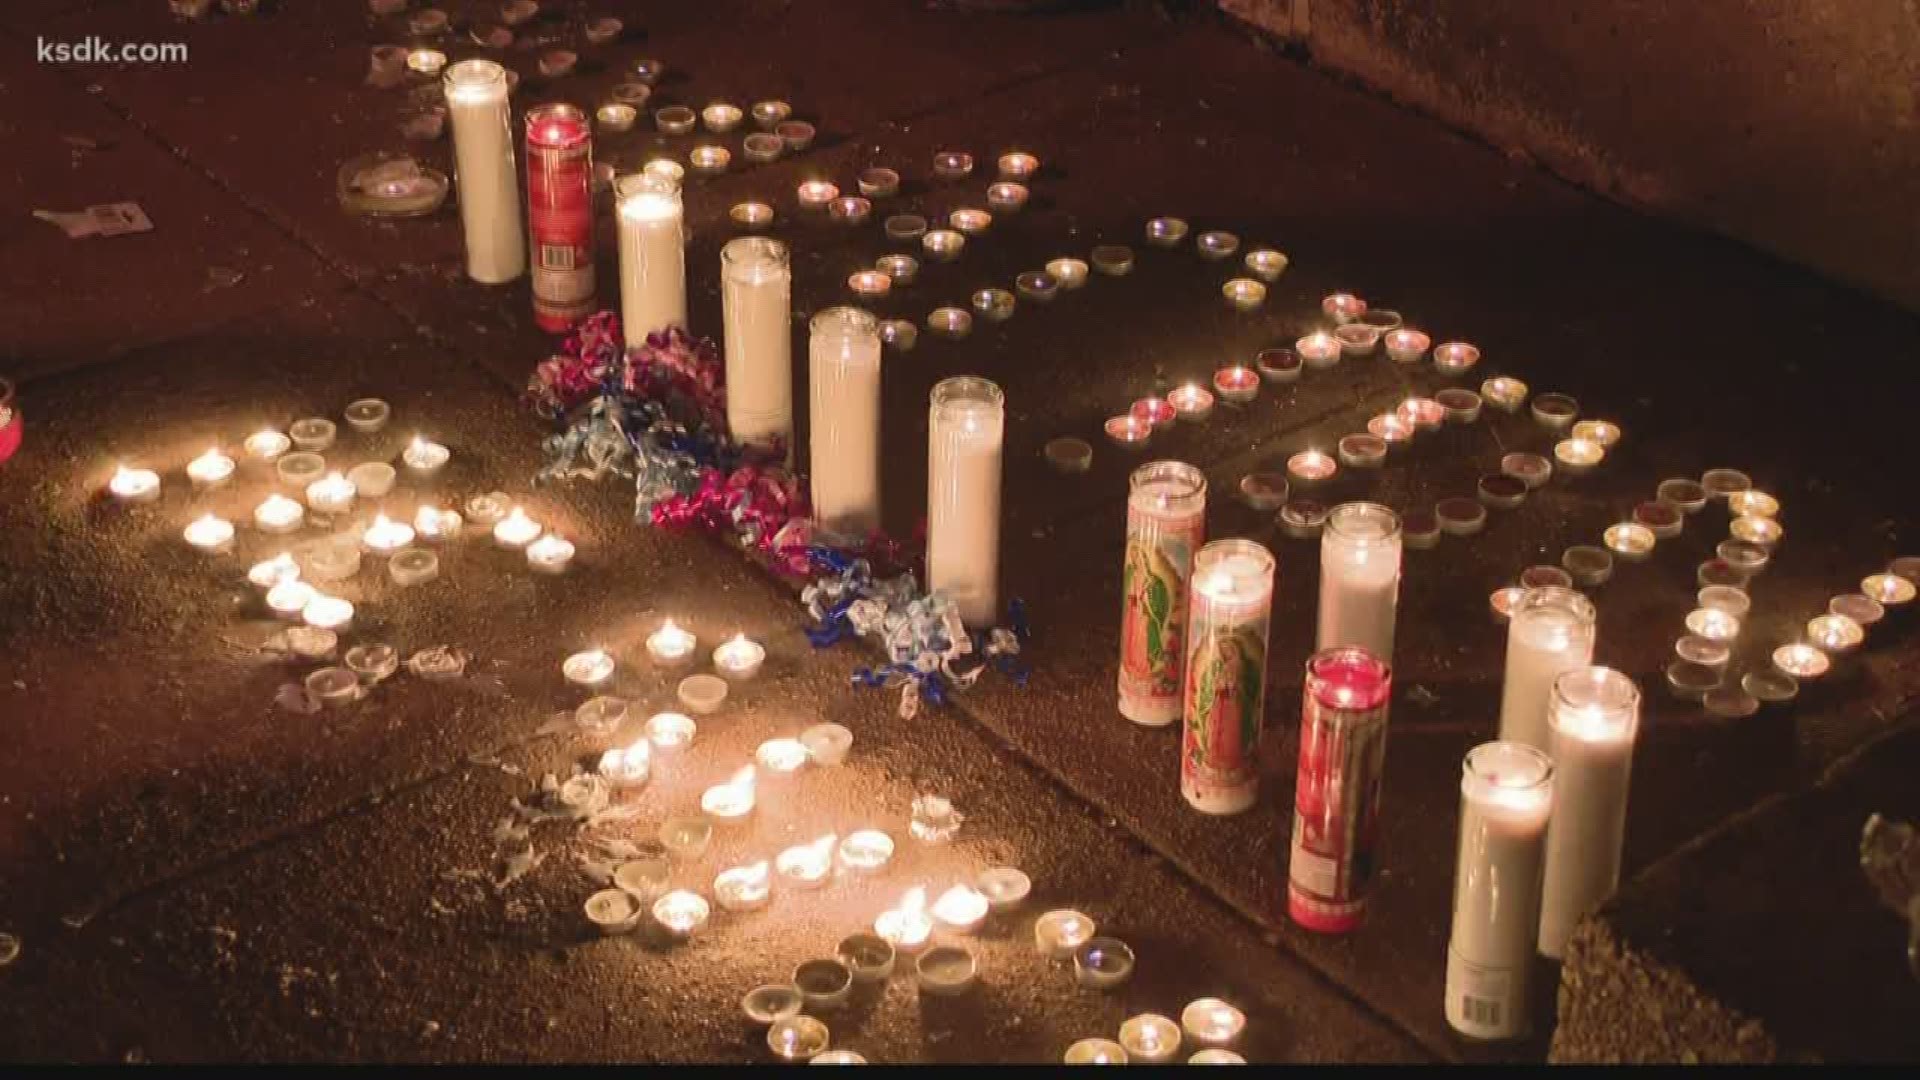 Family friends came together to remember the children and defend their mom.